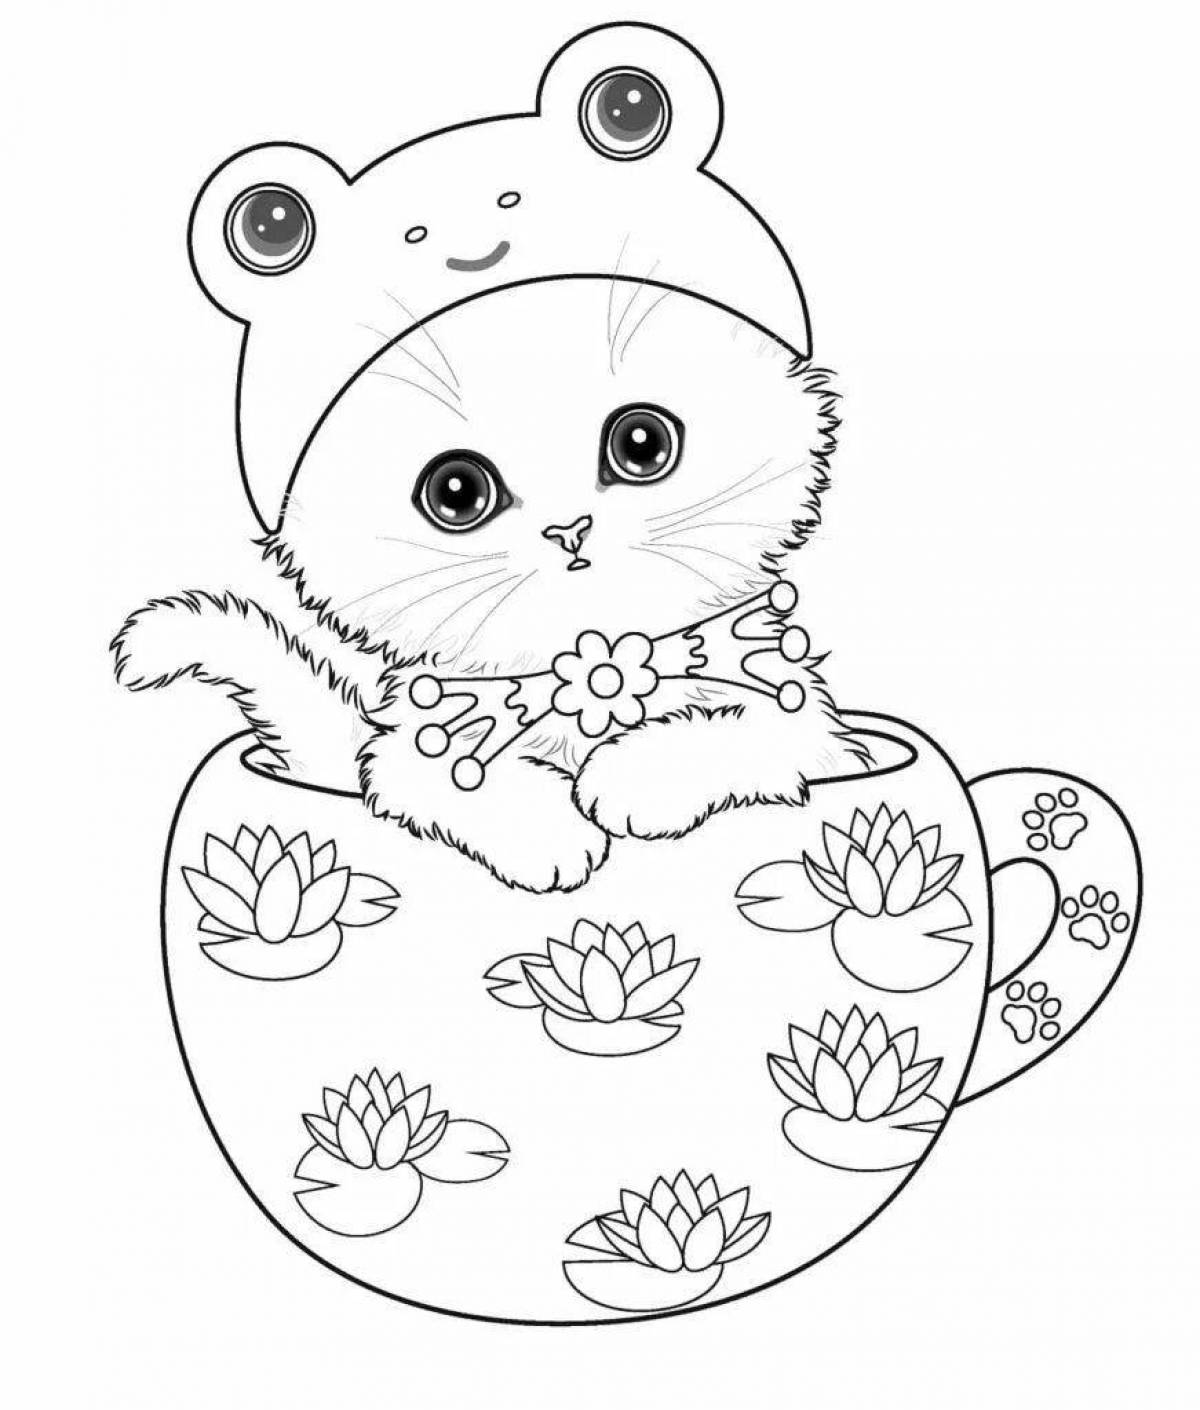 Coloring page graceful kittens